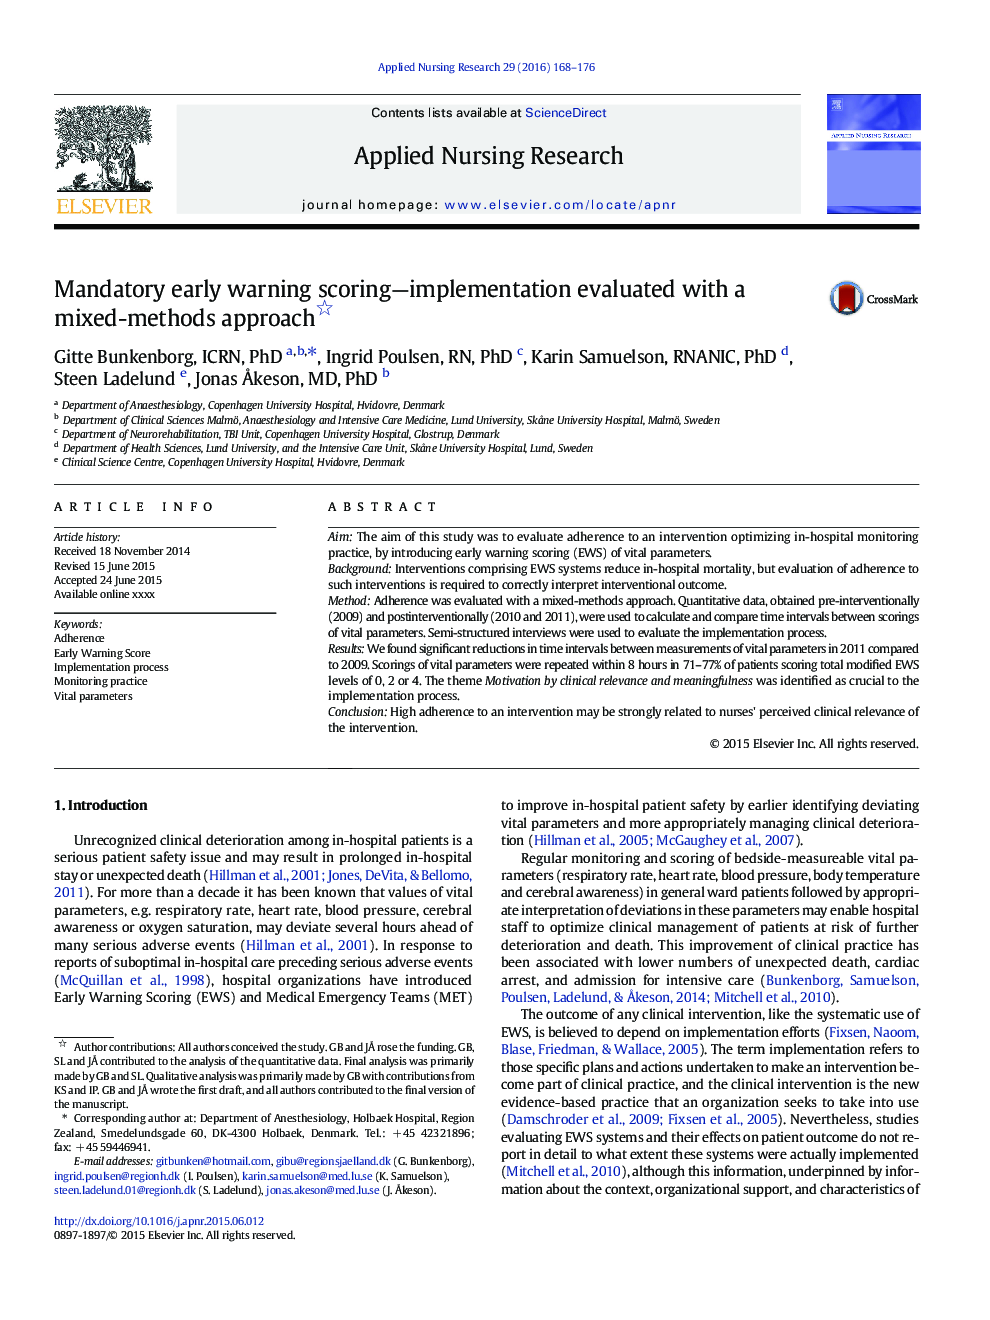 Mandatory early warning scoring-implementation evaluated with a mixed-methods approach